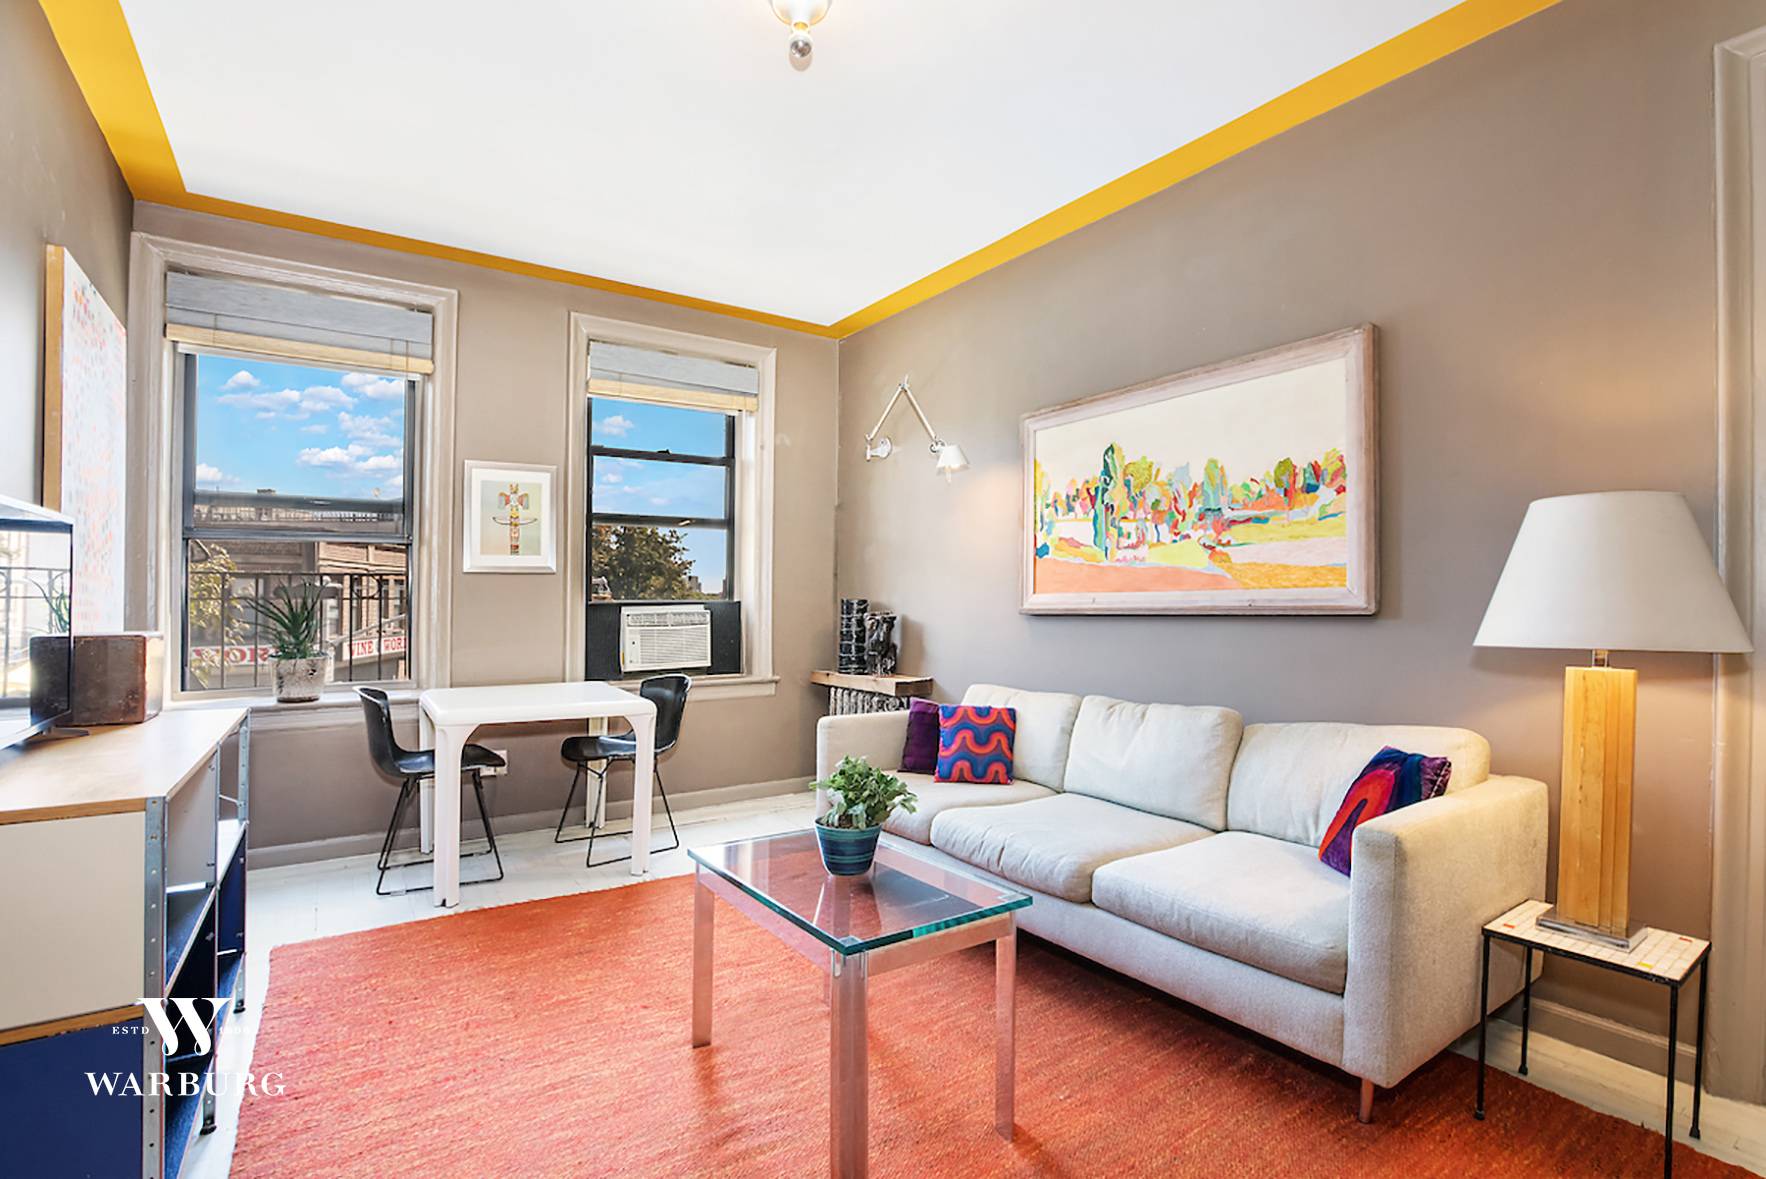 Welcome home to this charming 1 bedroom, 1 bathroom co op apartment just moments from the Brooklyn Museum, Prospect Park, and the Brooklyn Botanical Gardens.